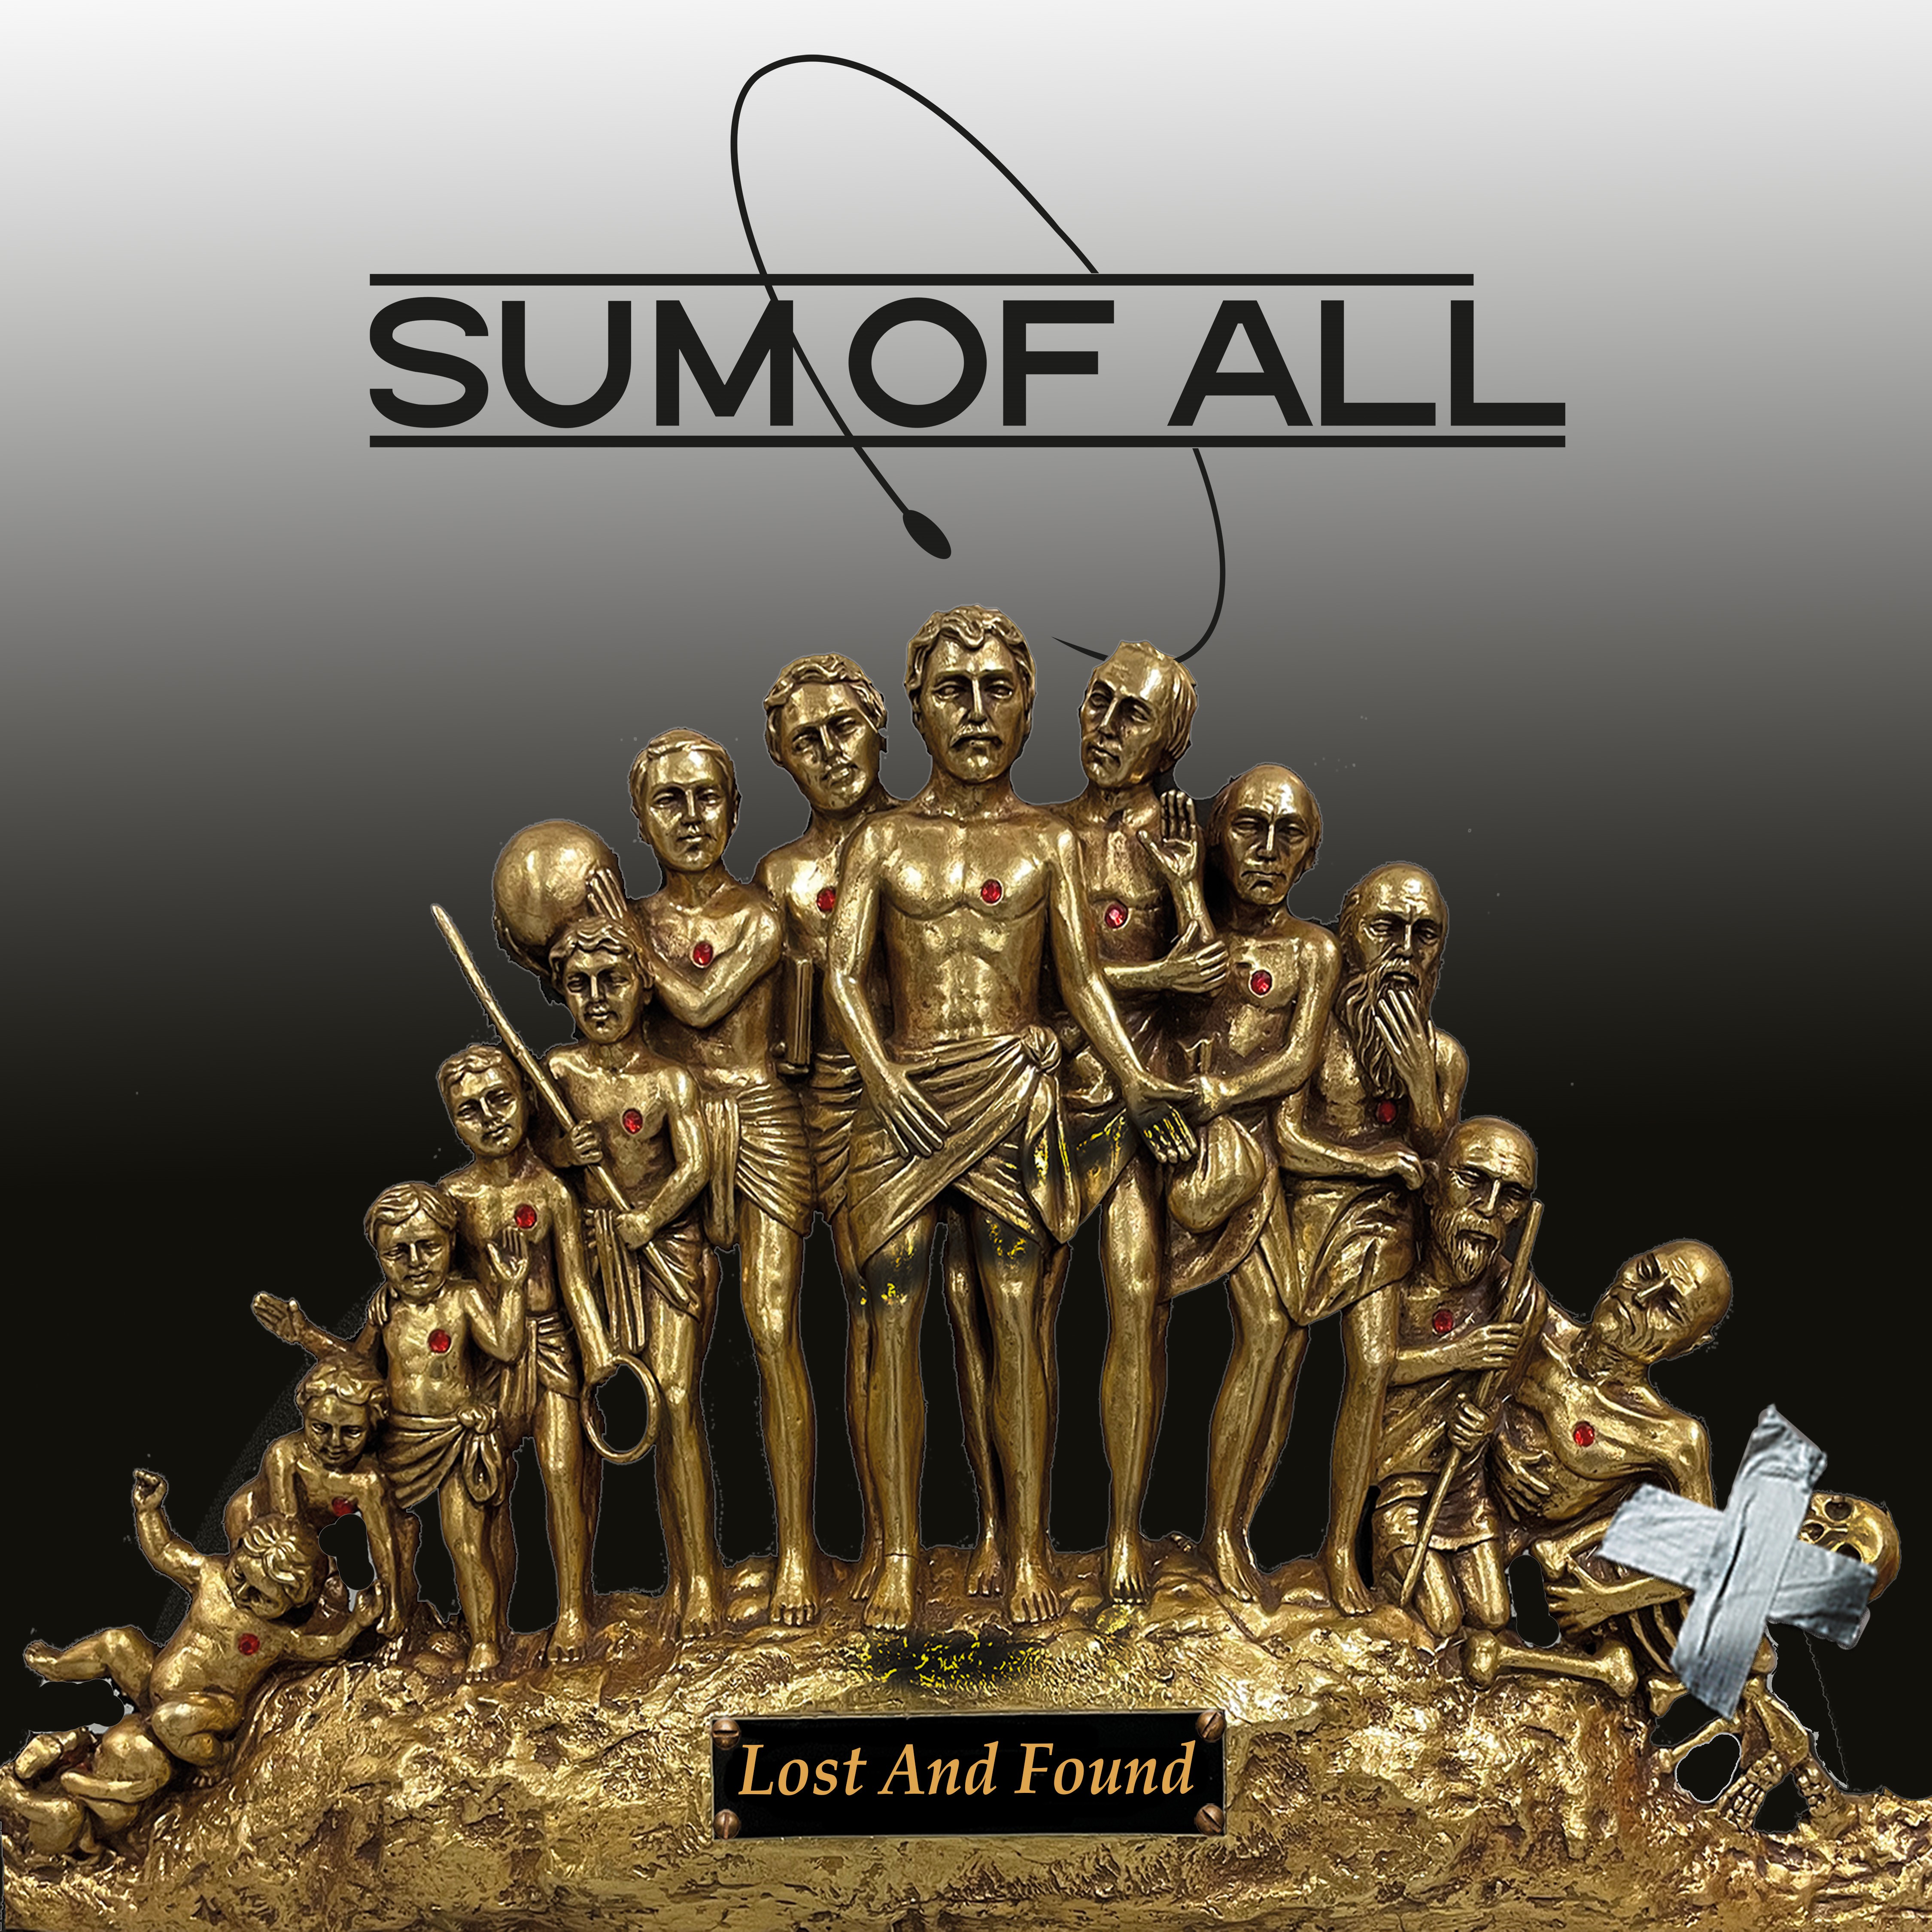 Album cover to song: Lost And Found by Sum Of All.